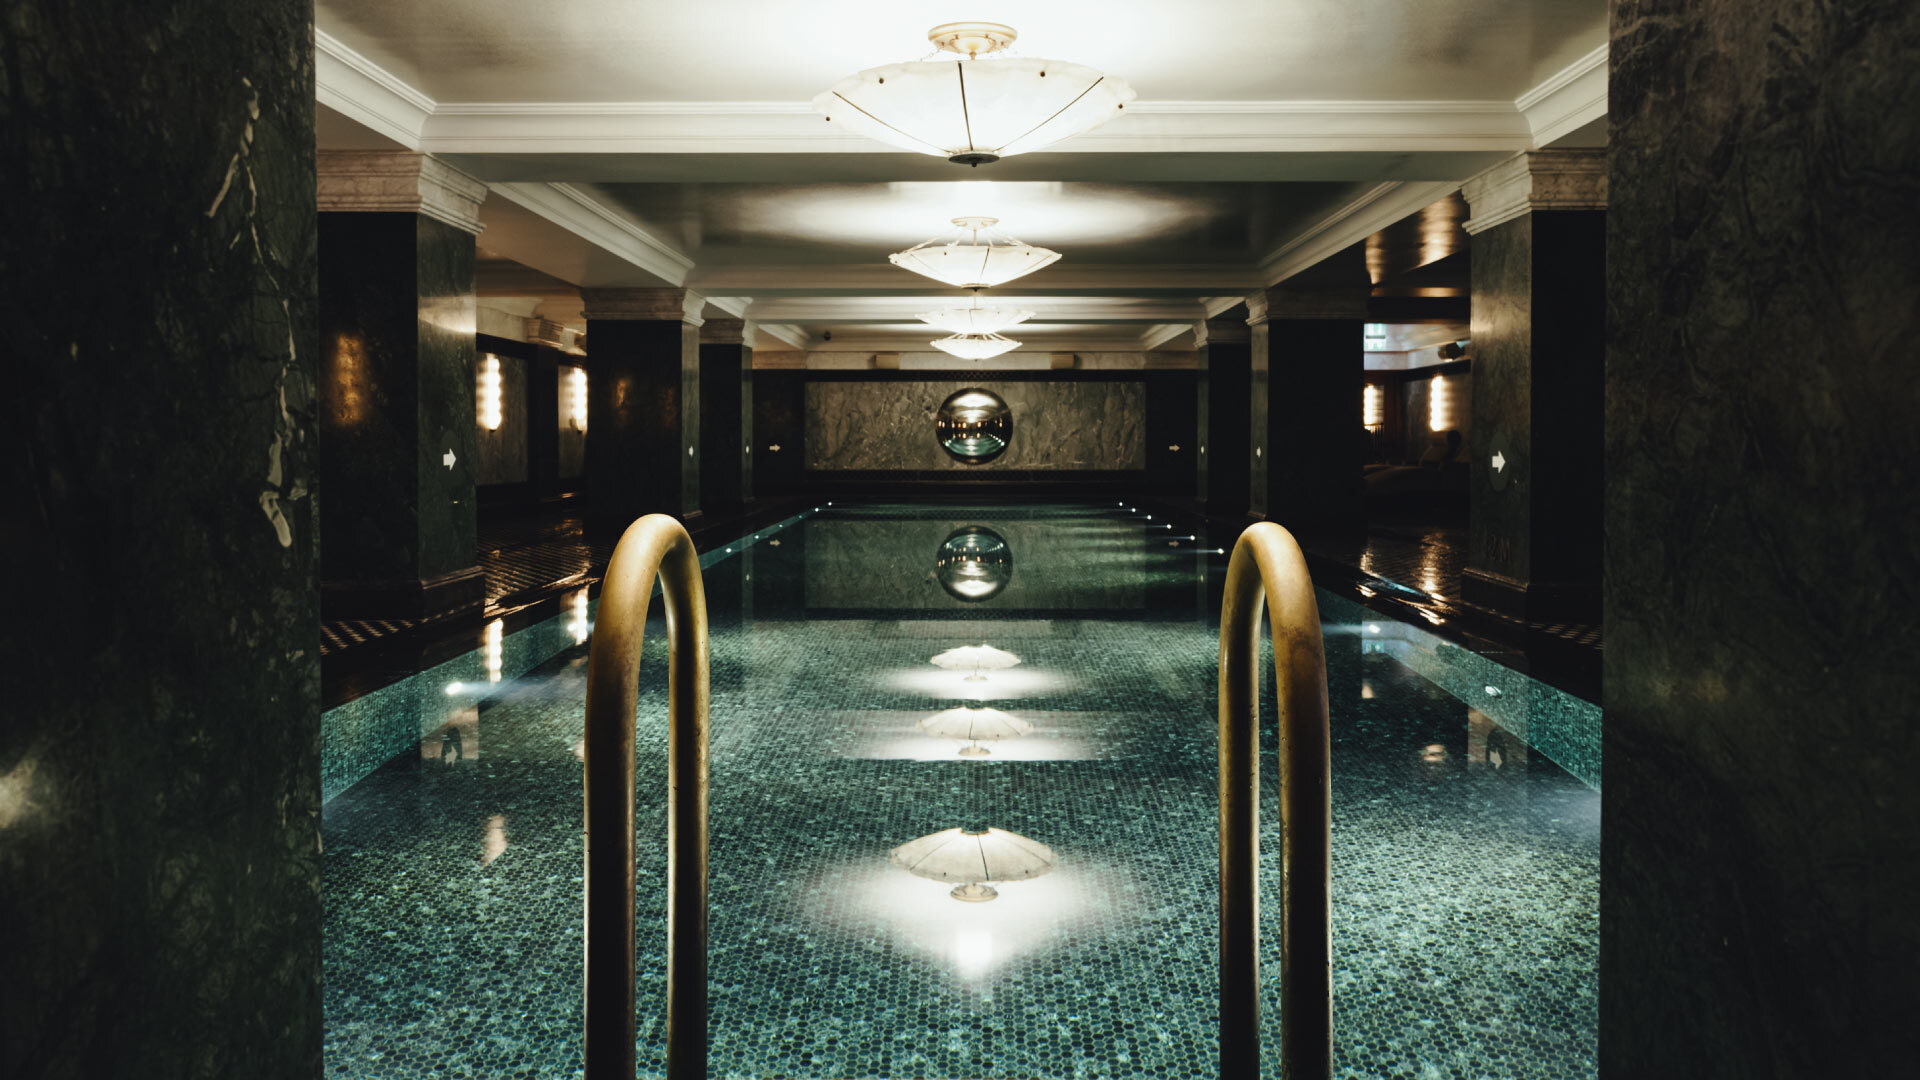 5 best Spas in the City of London - The Ned Spa - indoor pool, long tiled pool, black marble pillars surrounding it